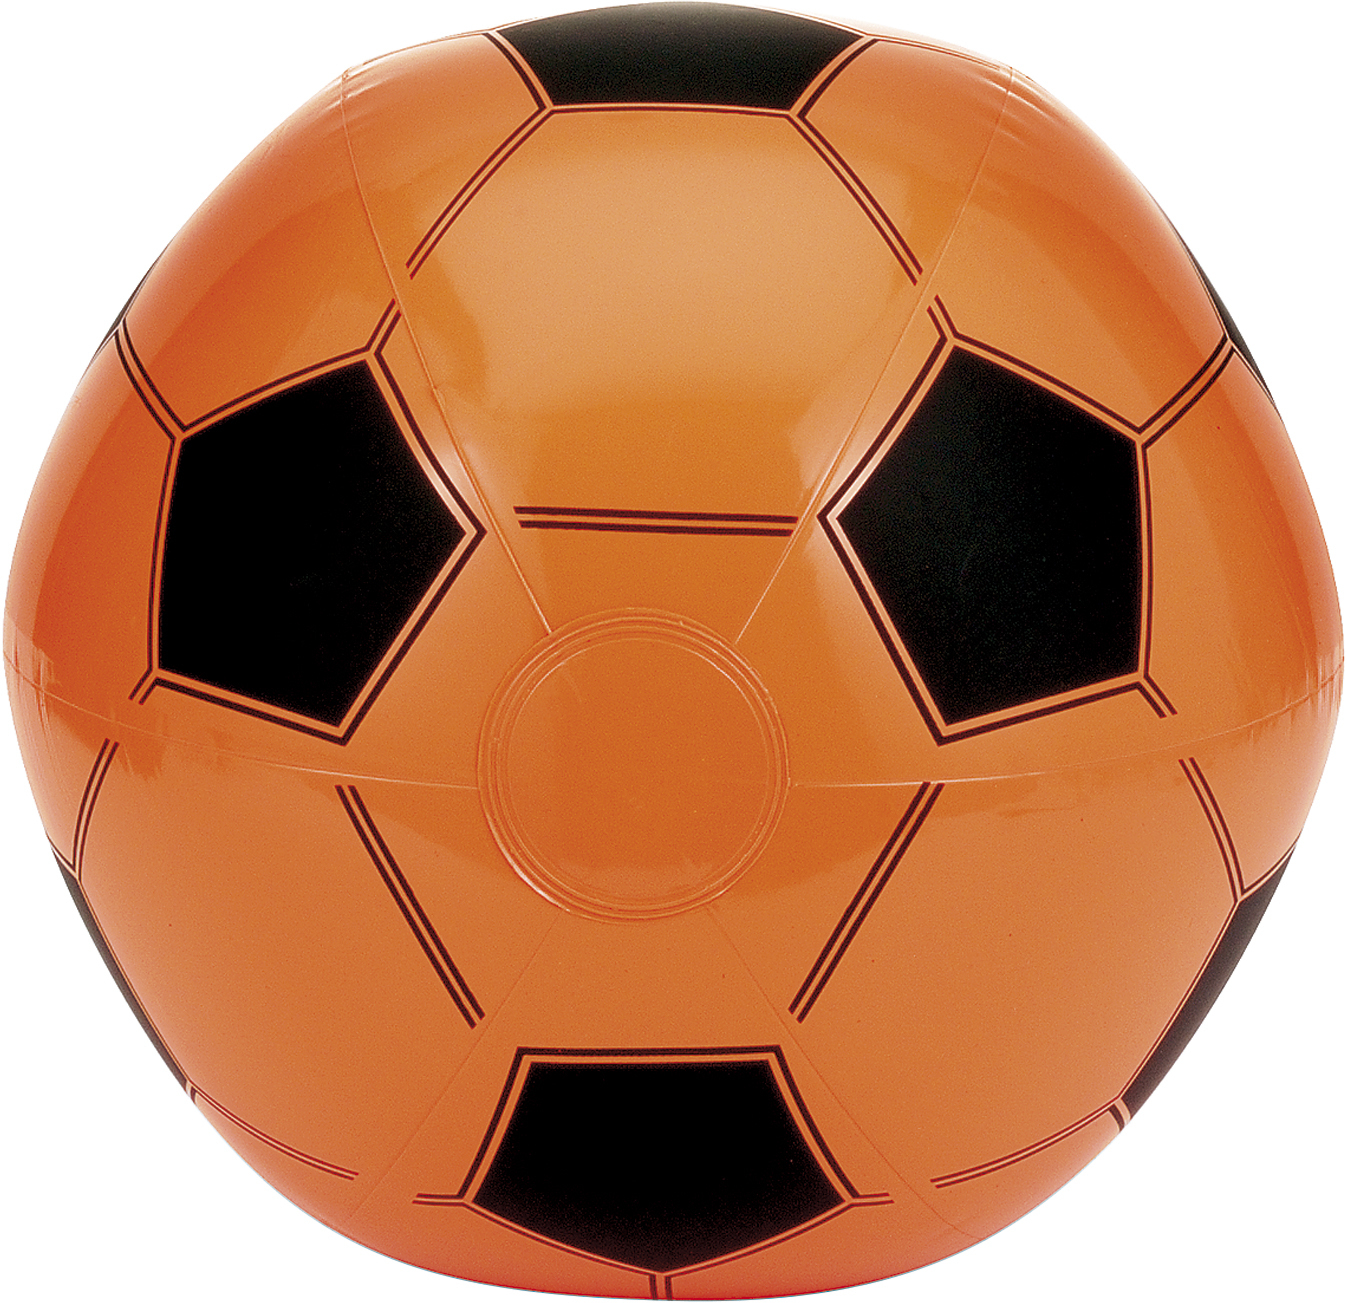 18 inch Inflatable football in black and orange